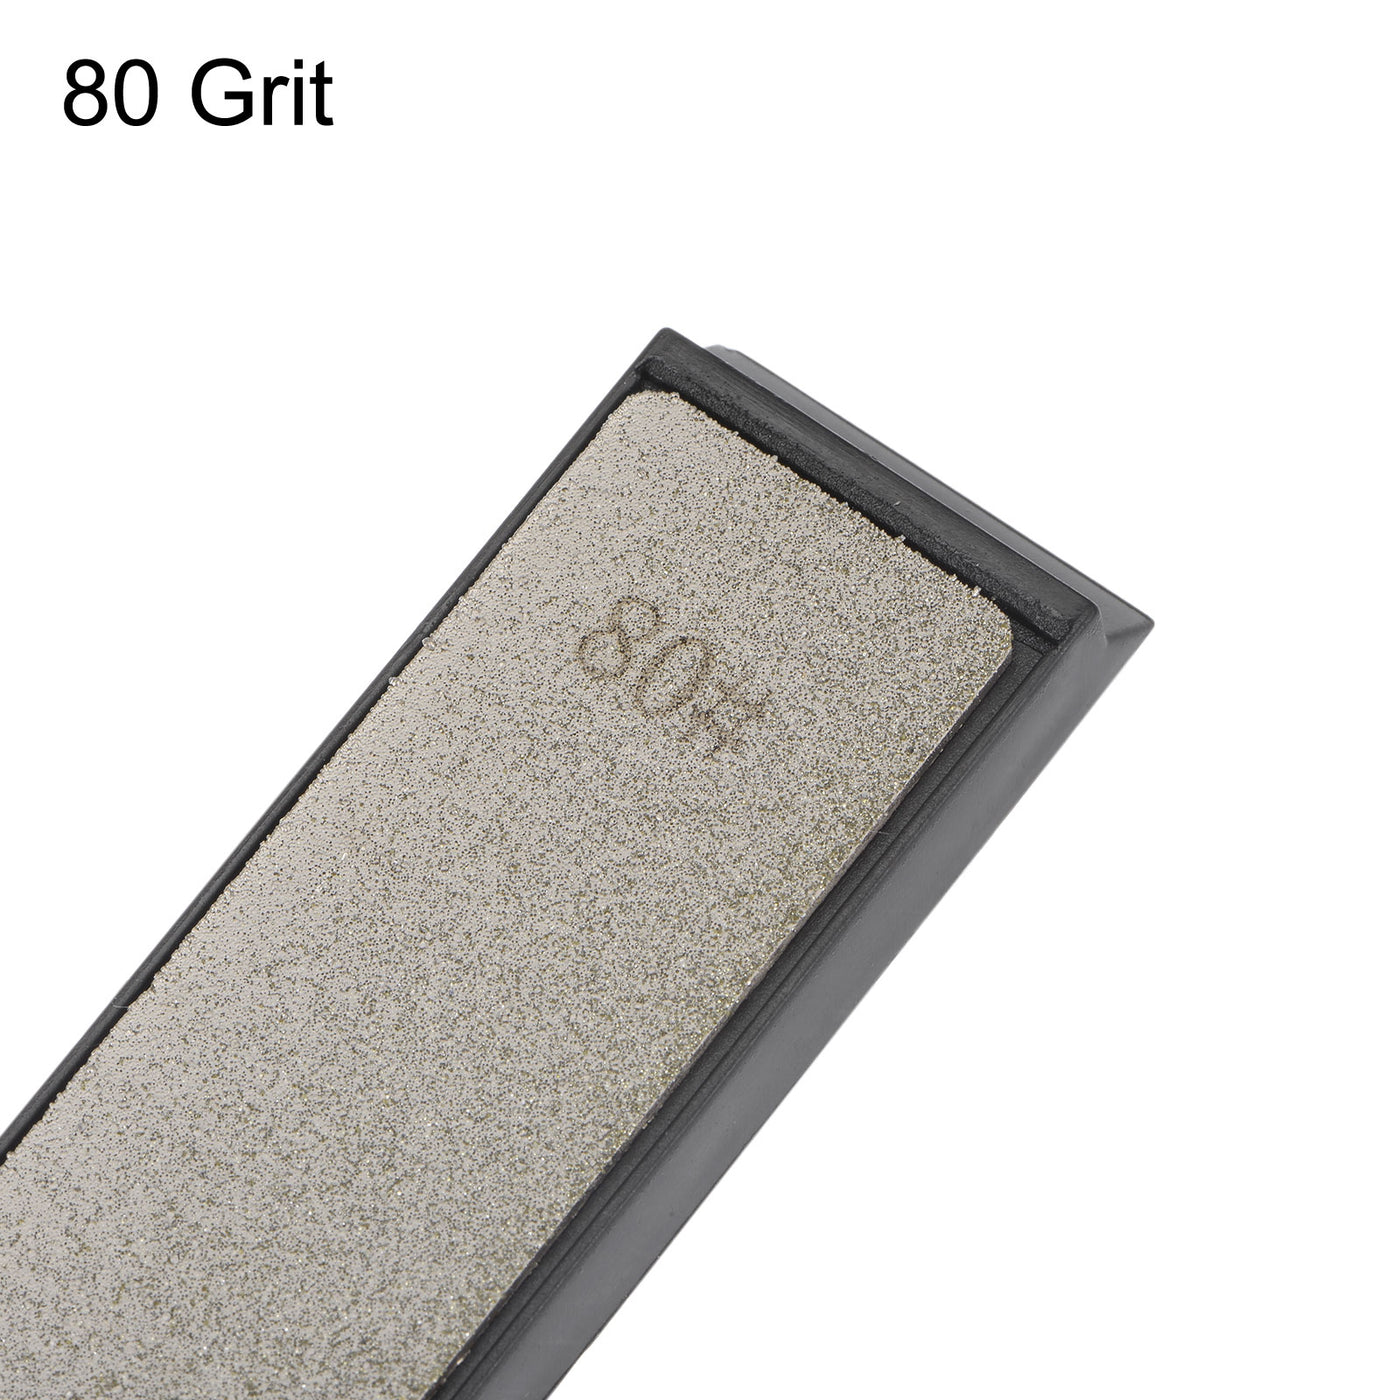 Uxcell Uxcell Diamond Sharpening Stones 240 Grit Whetstone with Non-Slip Base